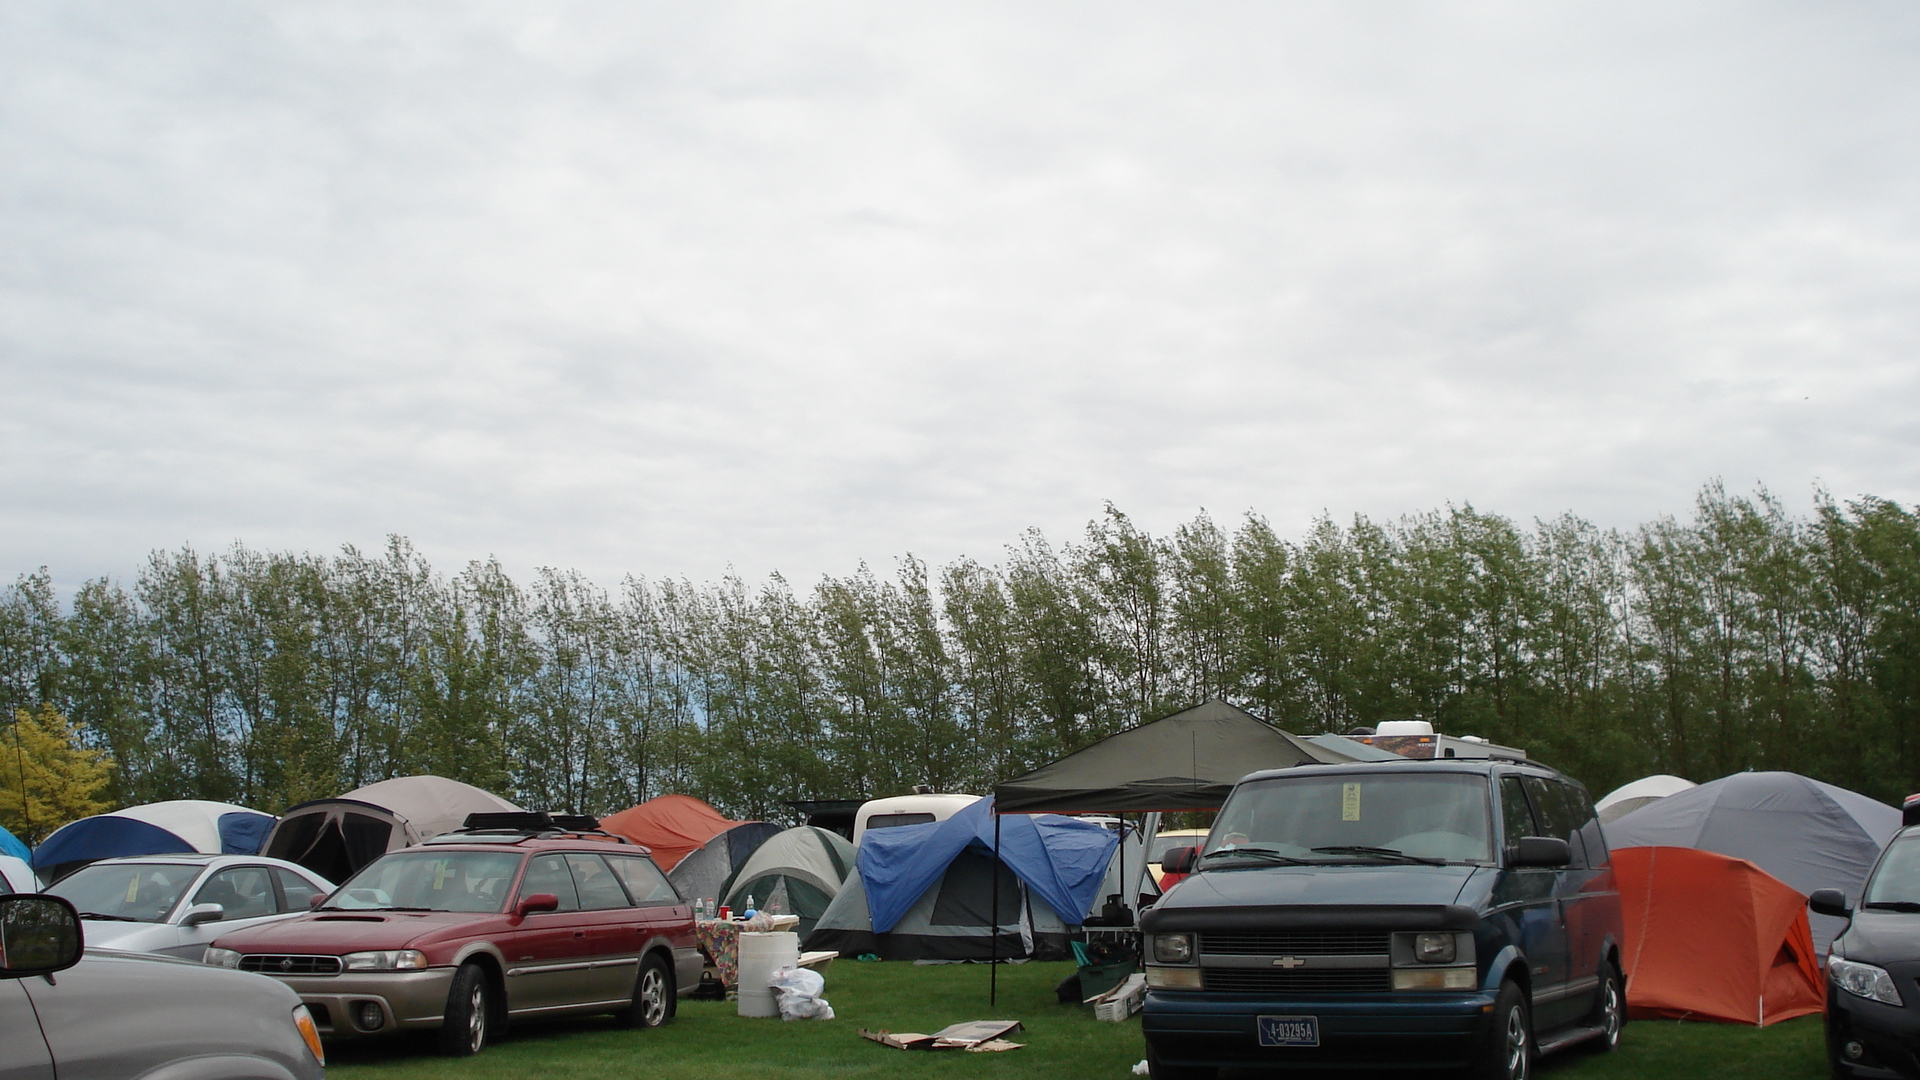 parked campers have been camping in a grassy field